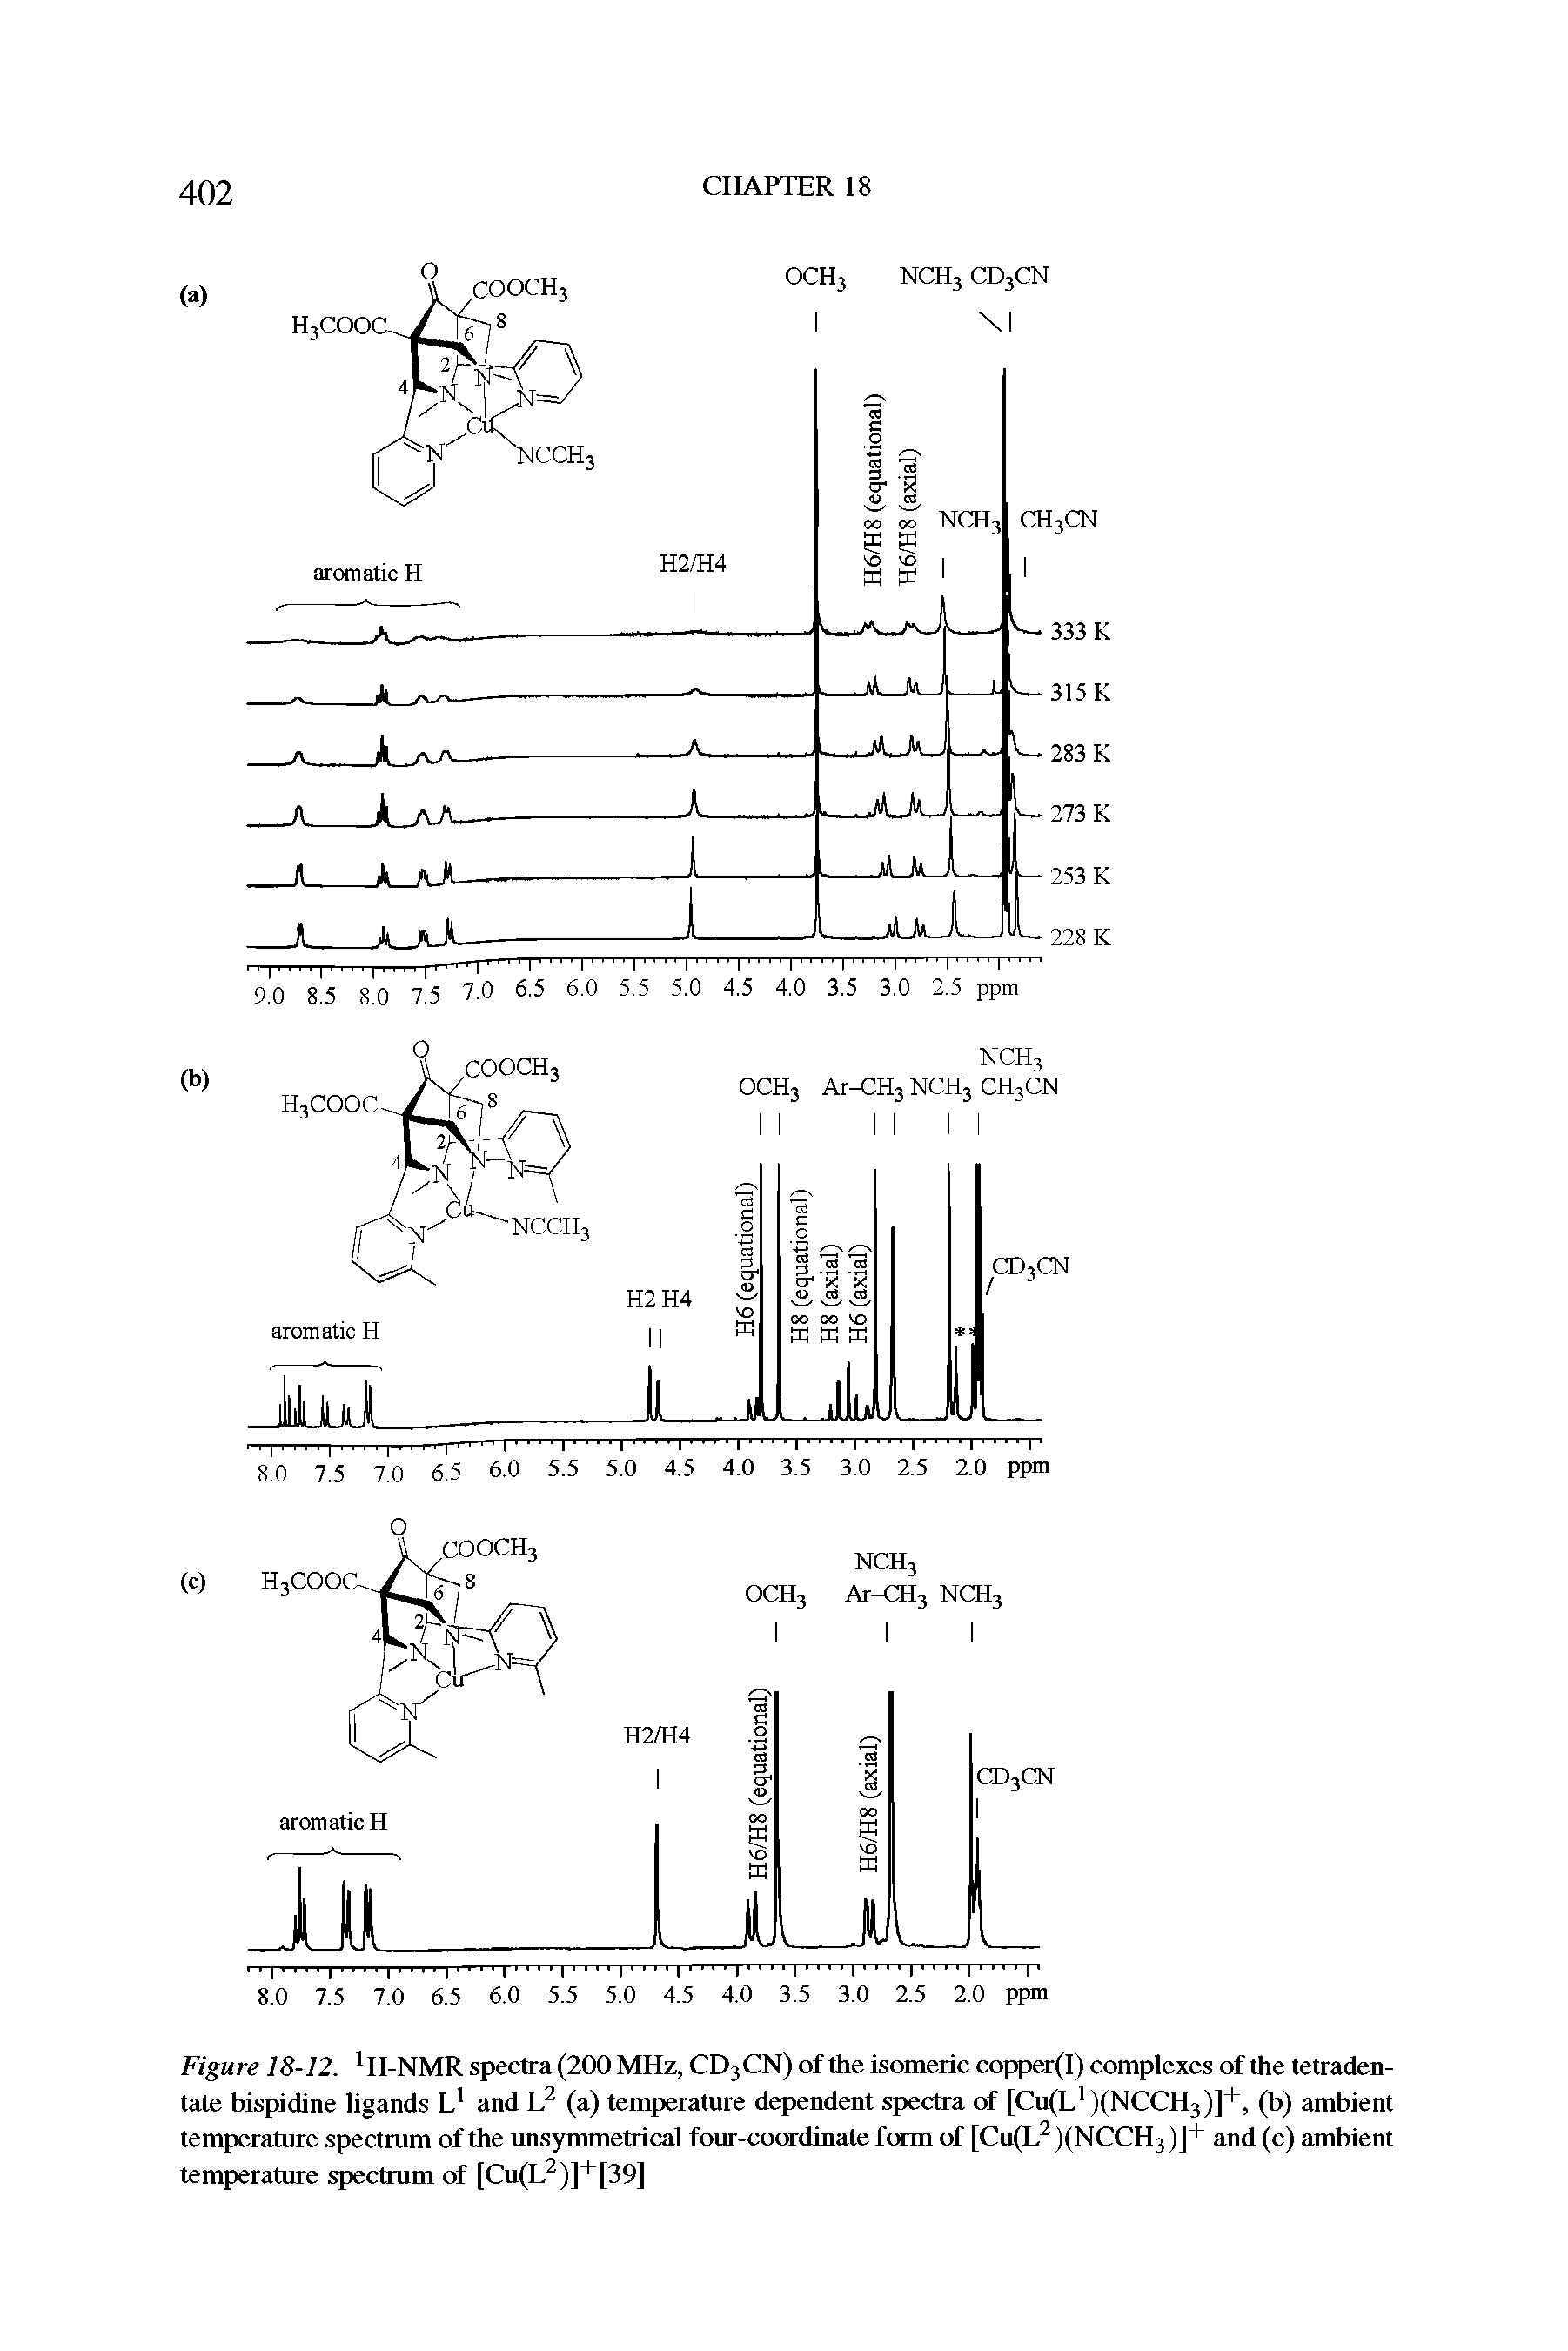 Figure 18-12. H-NMR spectra (200 MHz, CD3CN) of the isomeric copper(I) complexes of the tetraden-tate bispidine ligands L and (a) temperature dependent spectra of [Cu(L )(NCCH3)]+, (b) ambient temperature spectrum of the imsymmetrical four-coordinate form of [Cu(L XNCCH )]+ and (c) ambient temperature spectrum of [Cu(L )]+[39]...